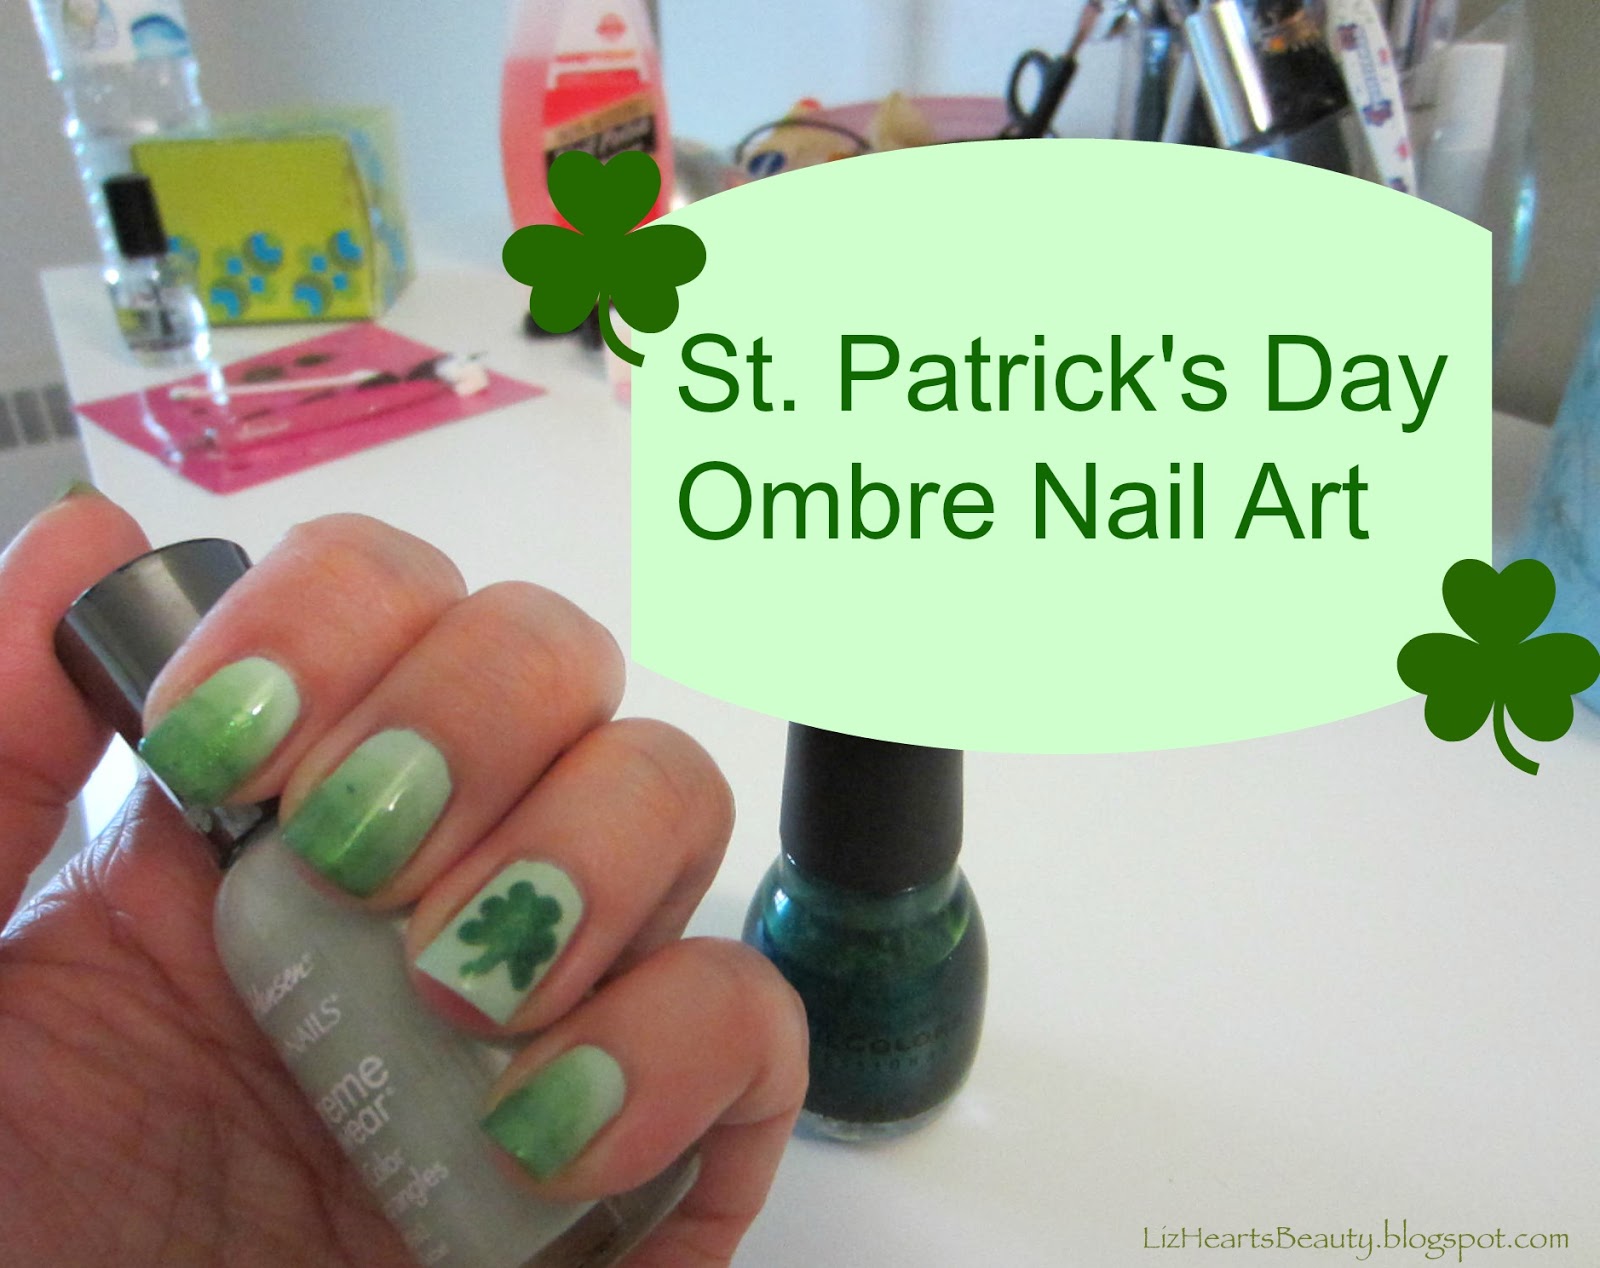 Ombre Nails Tutorial Video